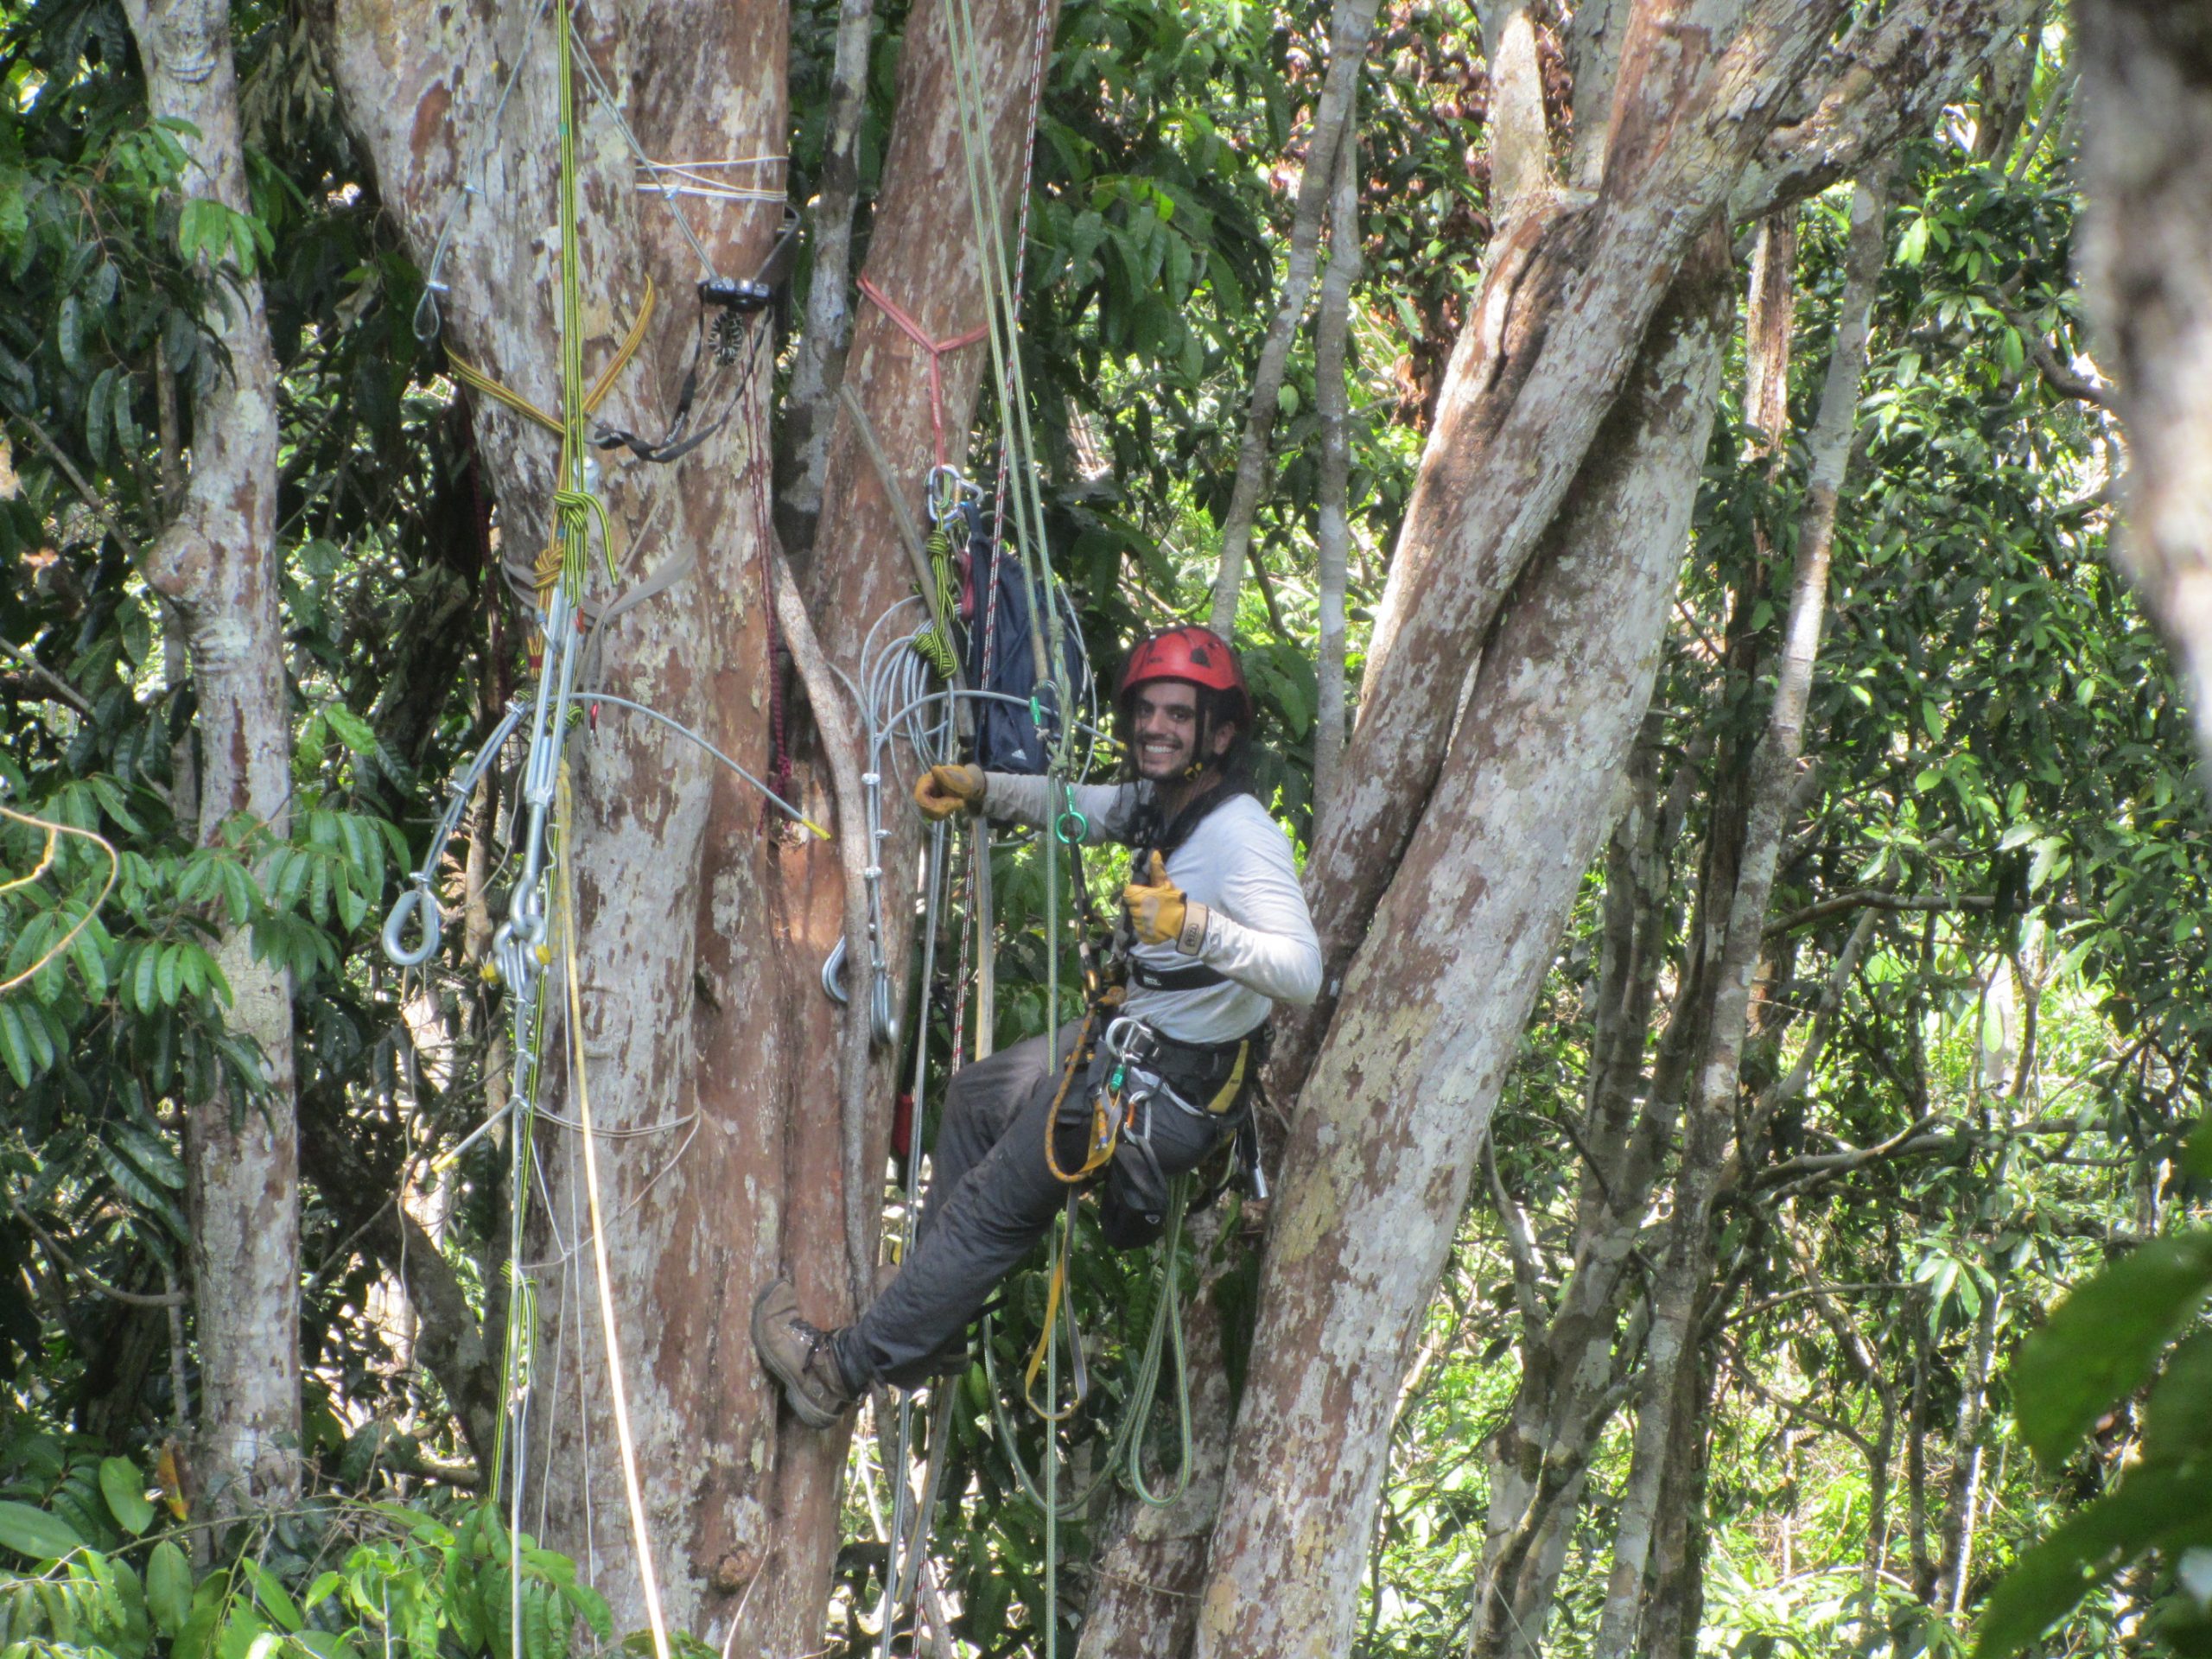 Pedro climbing in the Amazonian trees to collect data